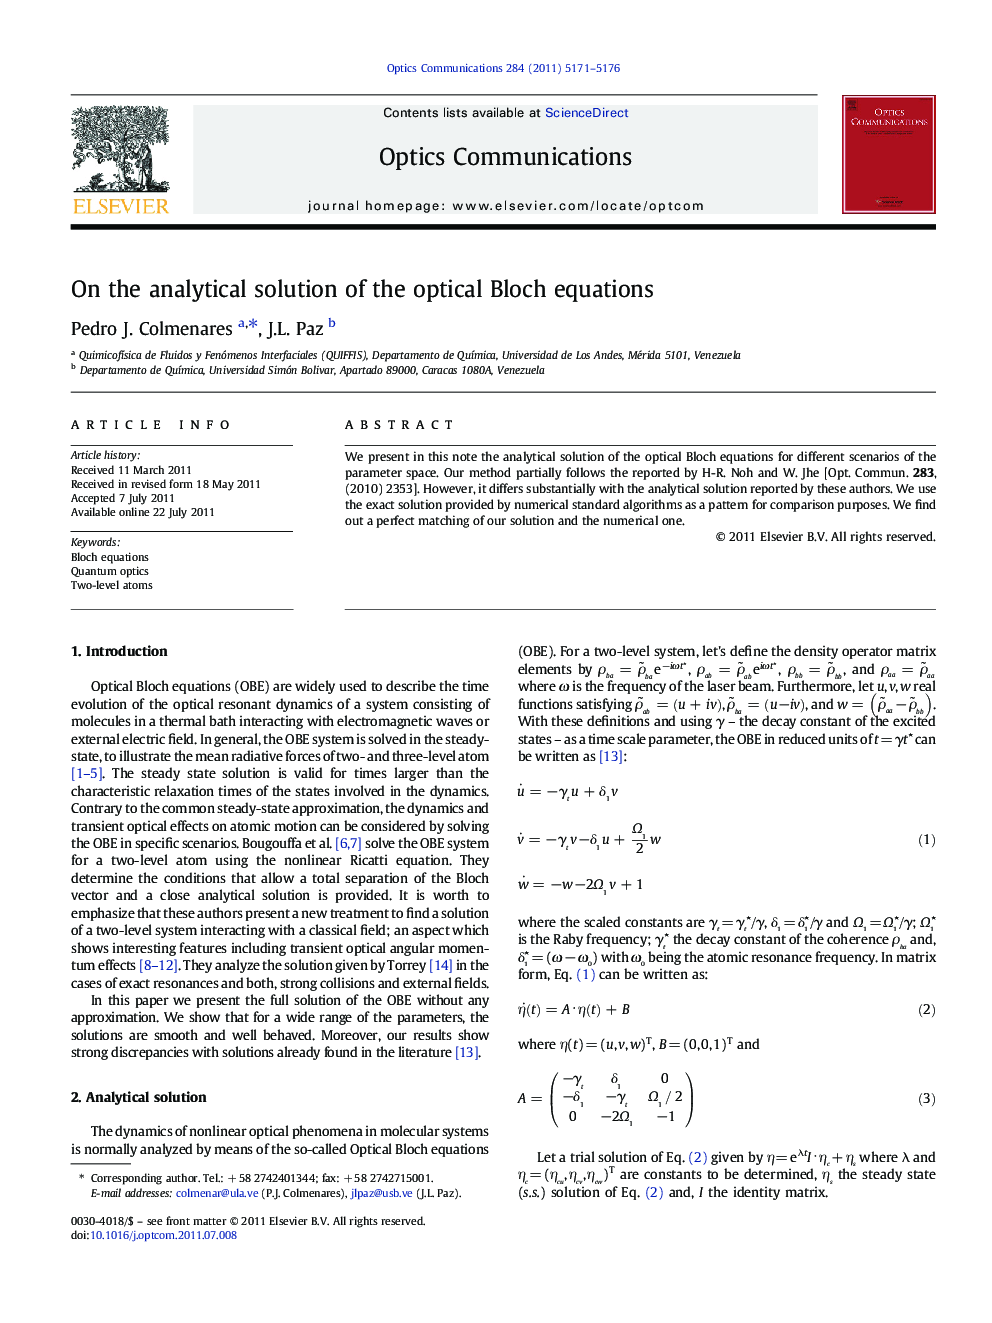 On the analytical solution of the optical Bloch equations